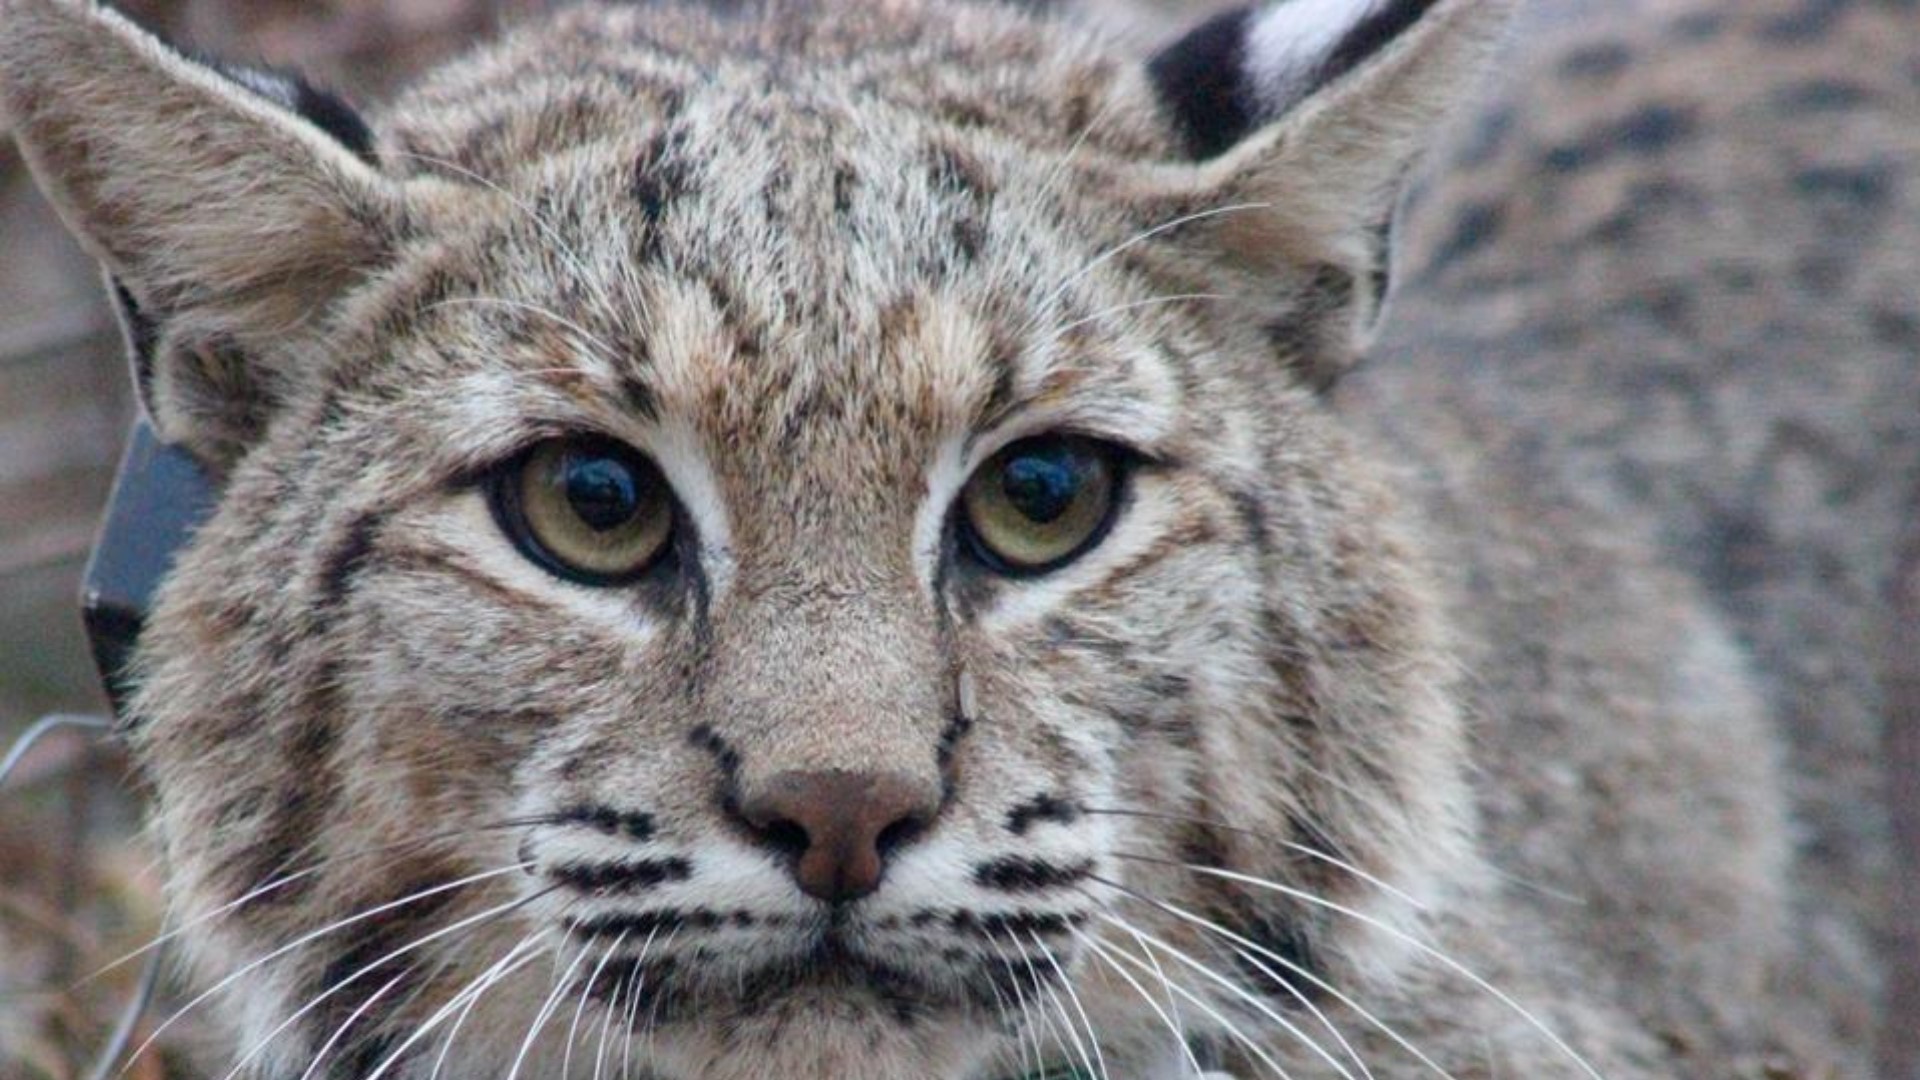 Bobcats have found ways to adapt in the North Texas area. While many worry about their own safety, urban biologists say they are actually providing people a service.